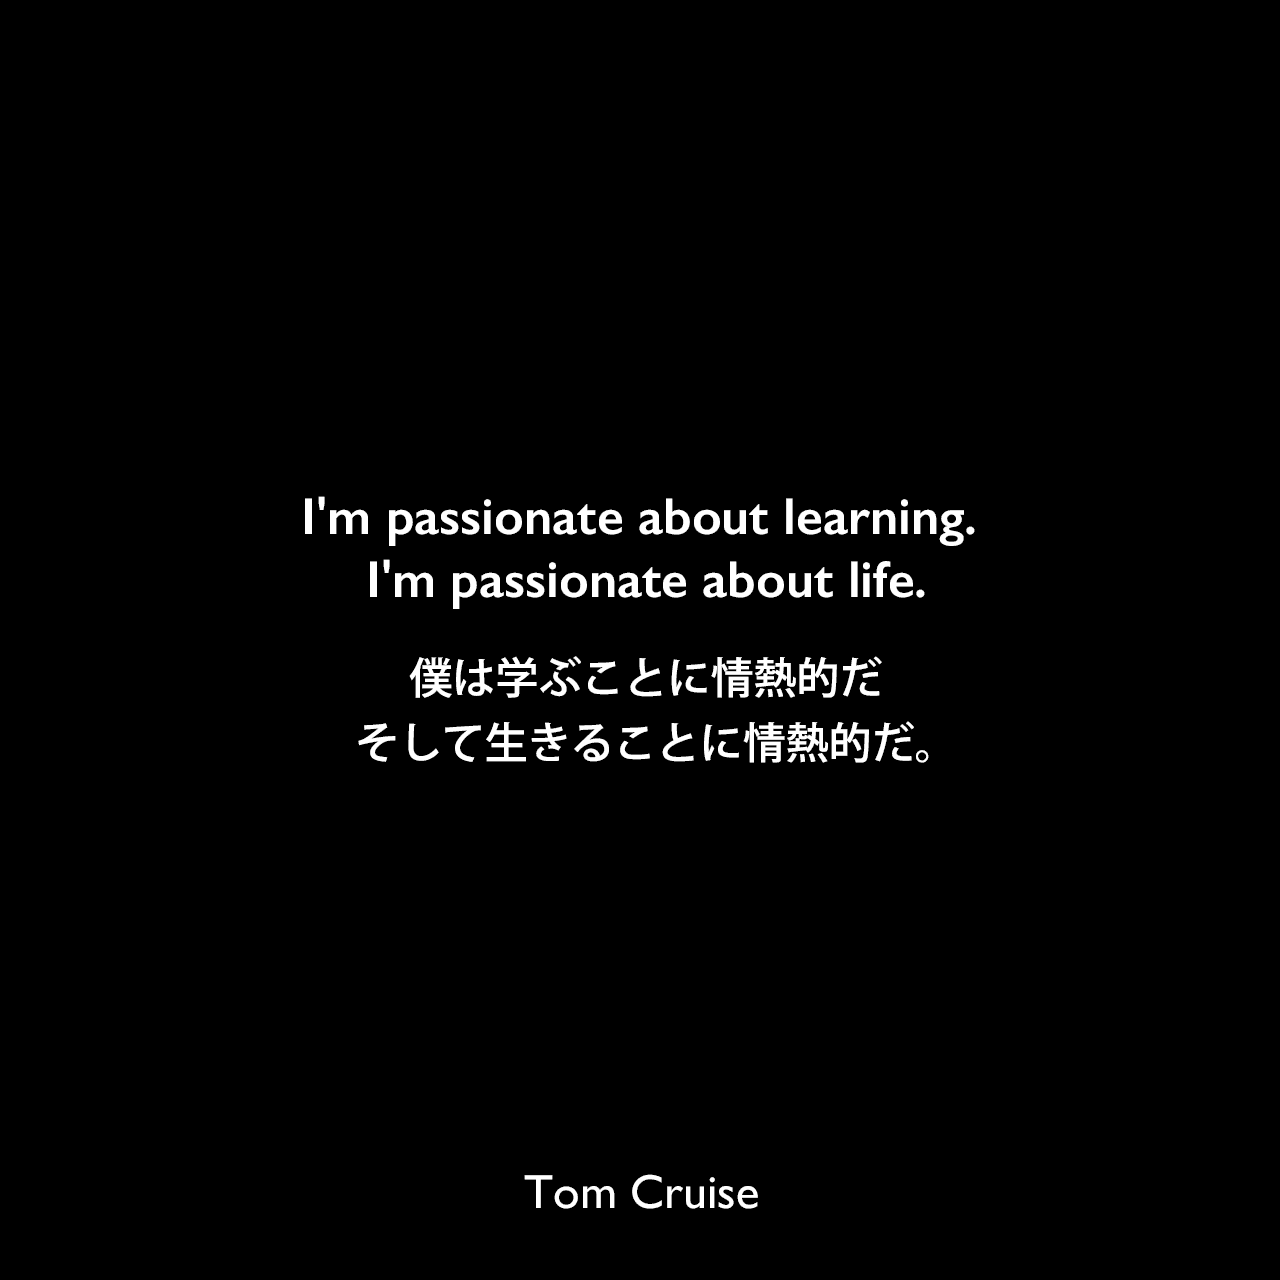 I'm passionate about learning. I'm passionate about life.僕は学ぶことに情熱的だ、そして生きることに情熱的だ。Tom Cruise